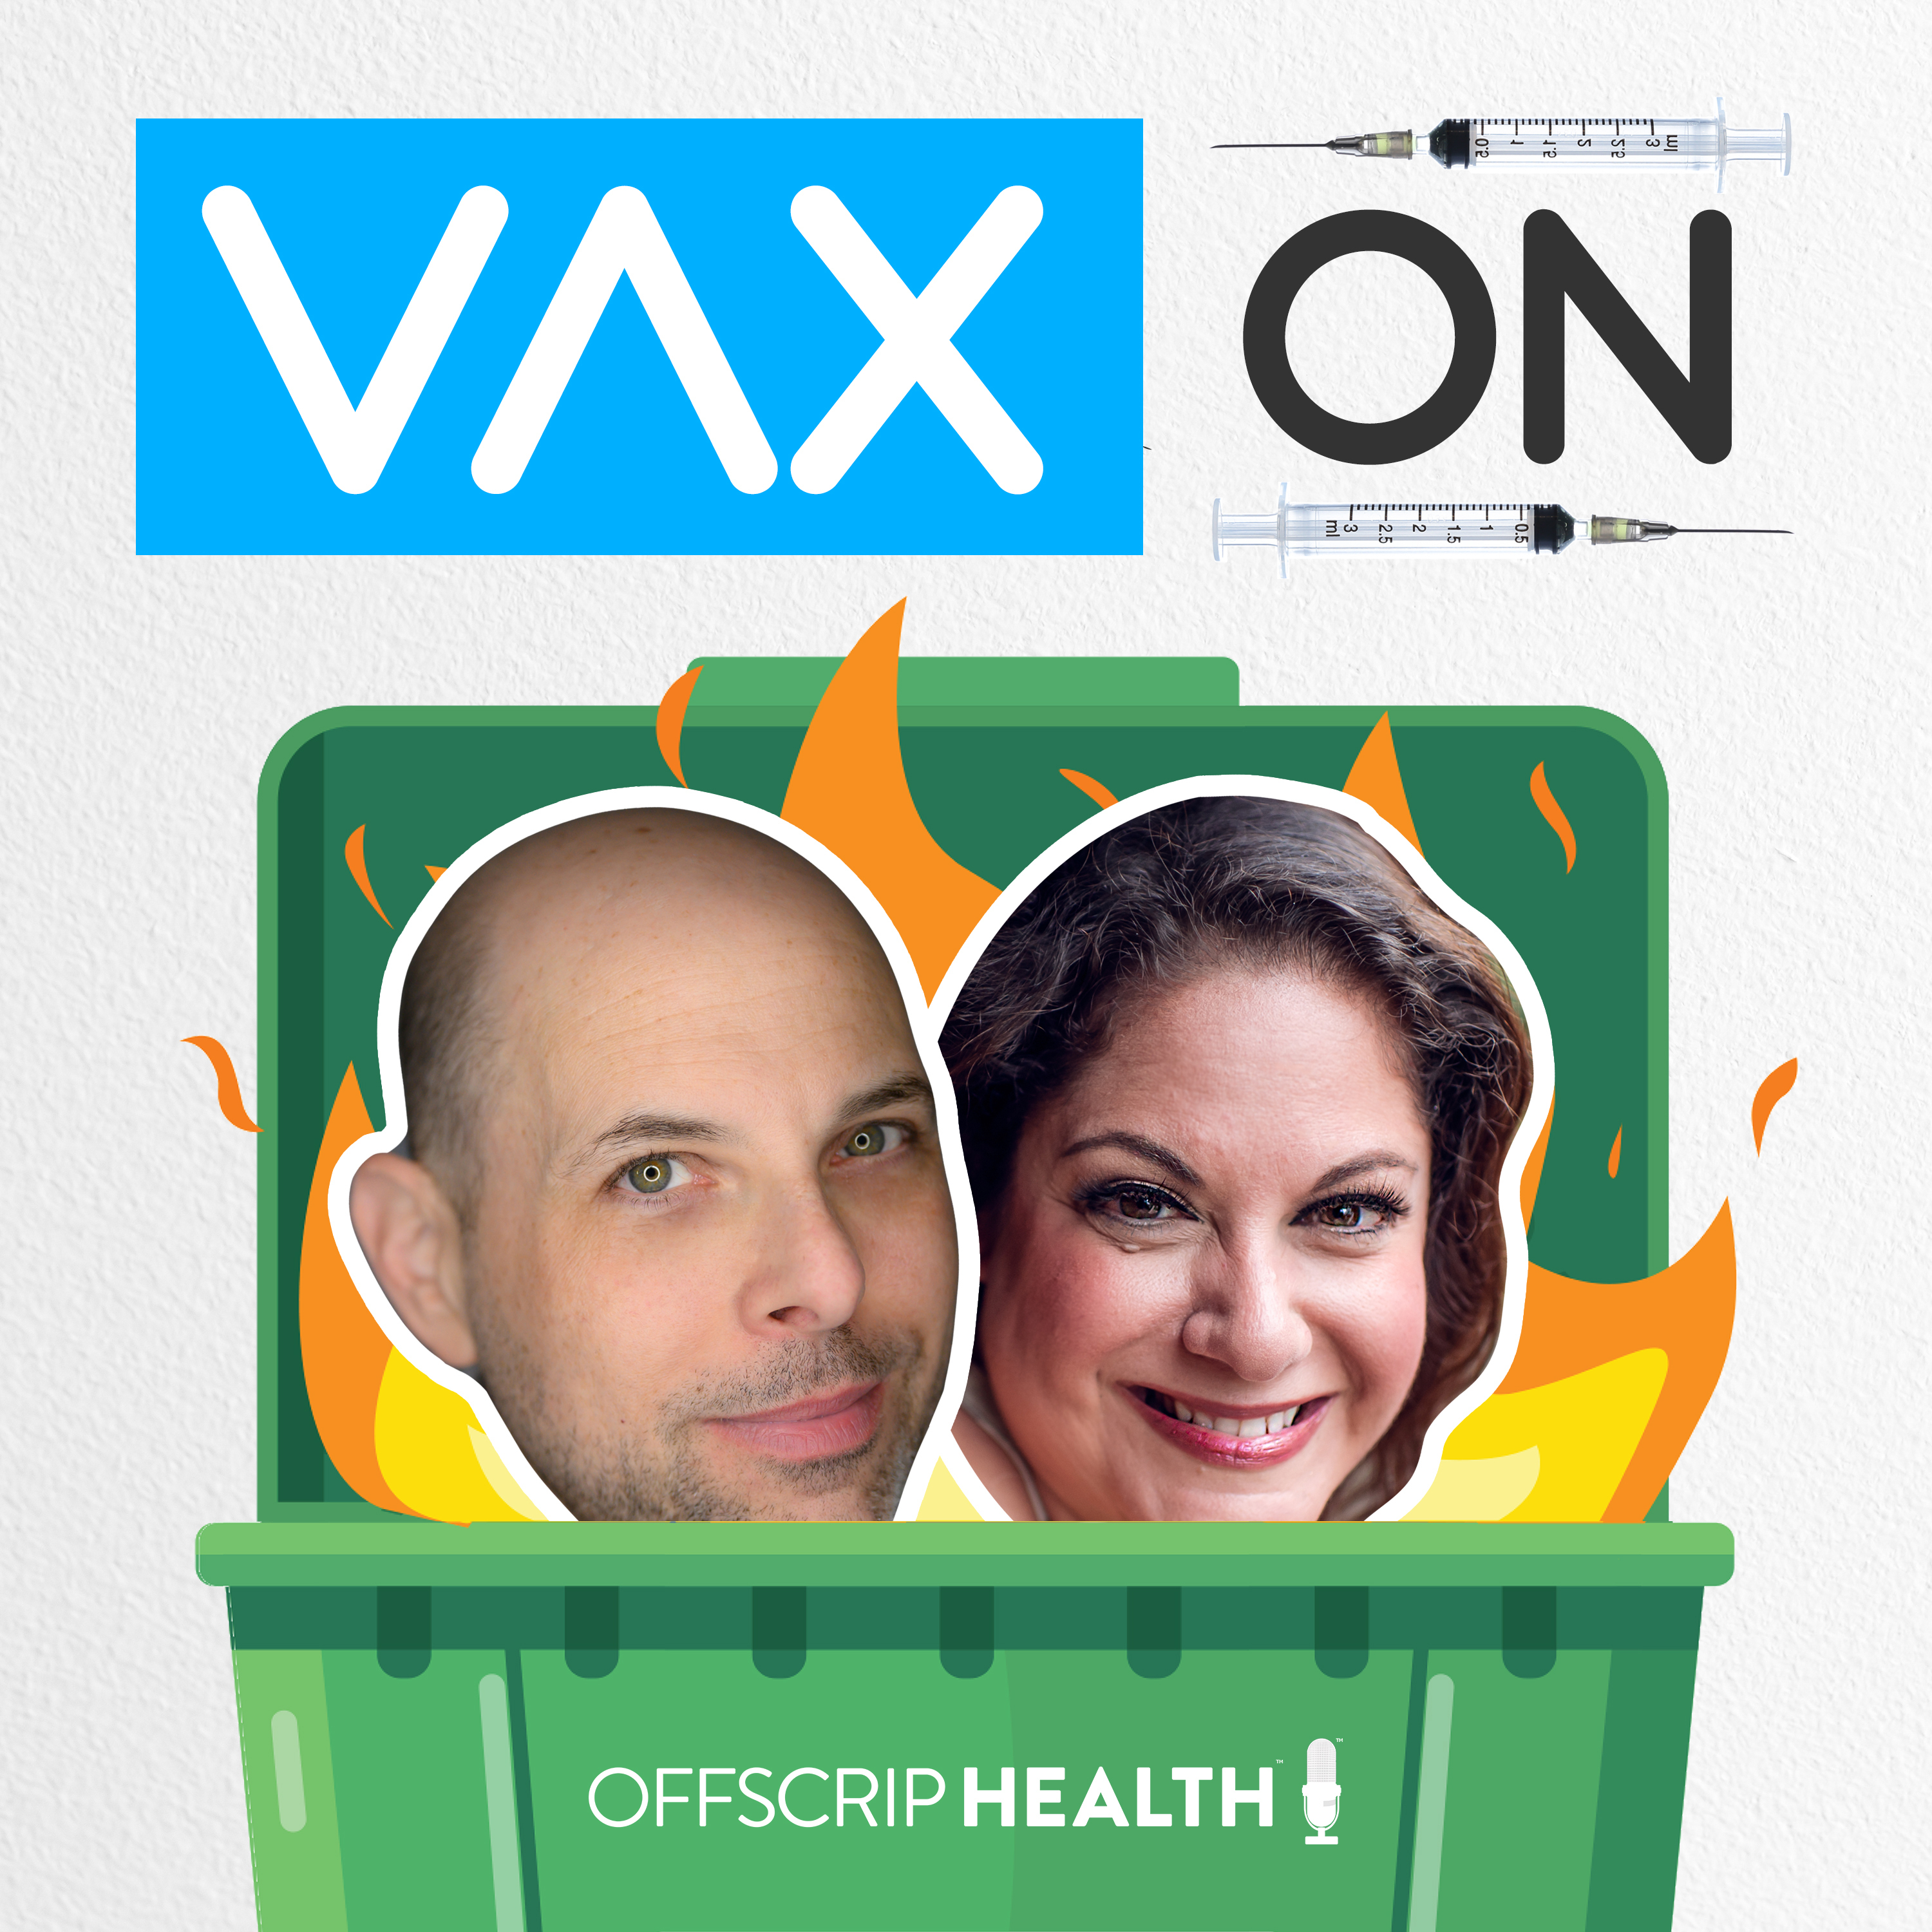 Vax On: Cootie Boosters, COVID Copywriters, and Insurance Inanity